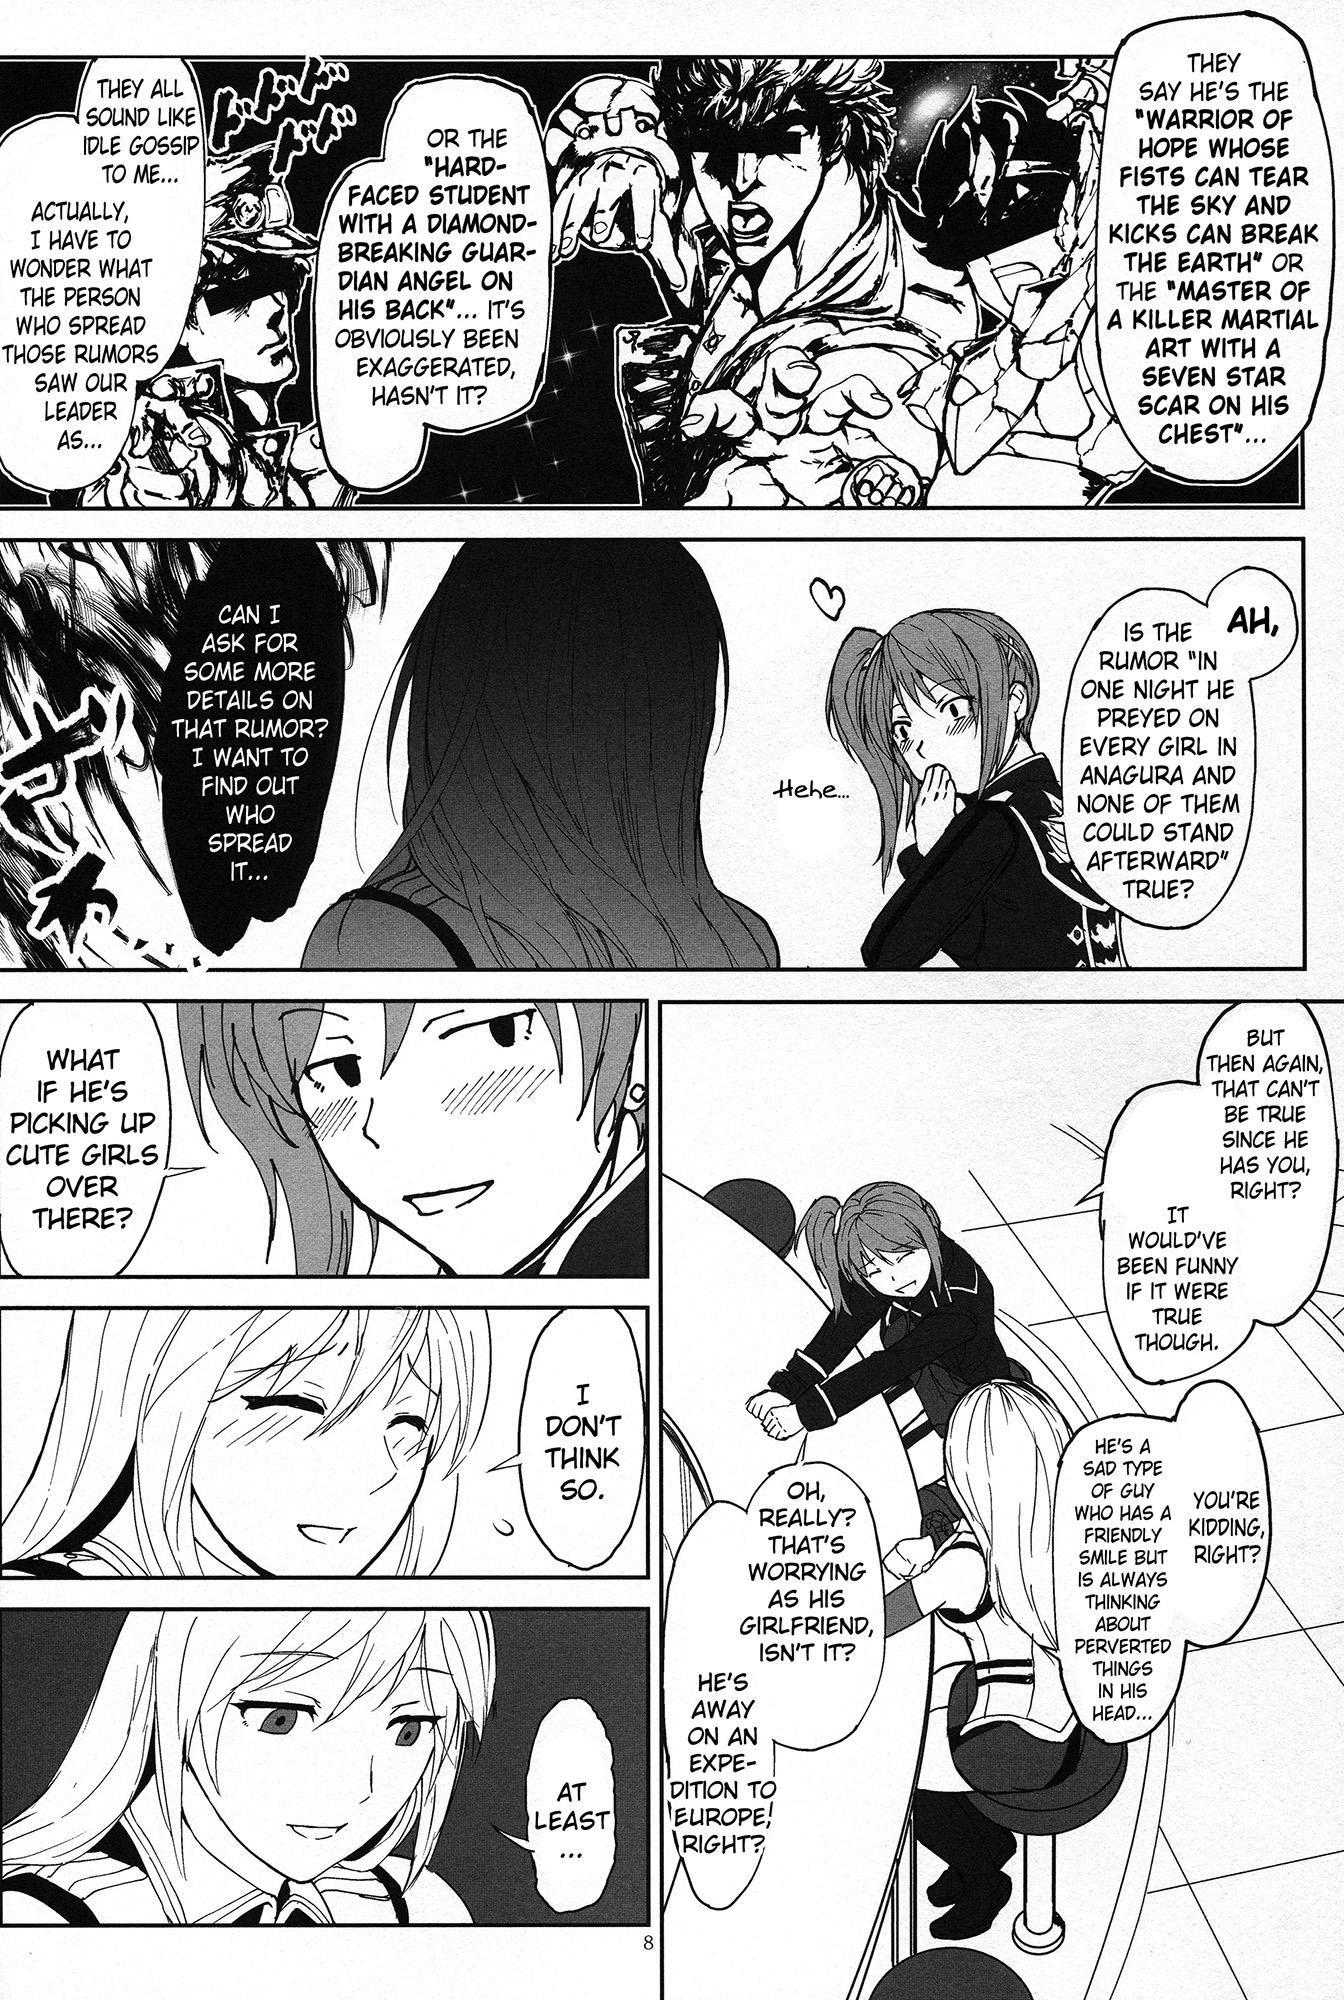 Maledom Again #2 "Flashback Memories" - God eater Hard Core Sex - Page 7